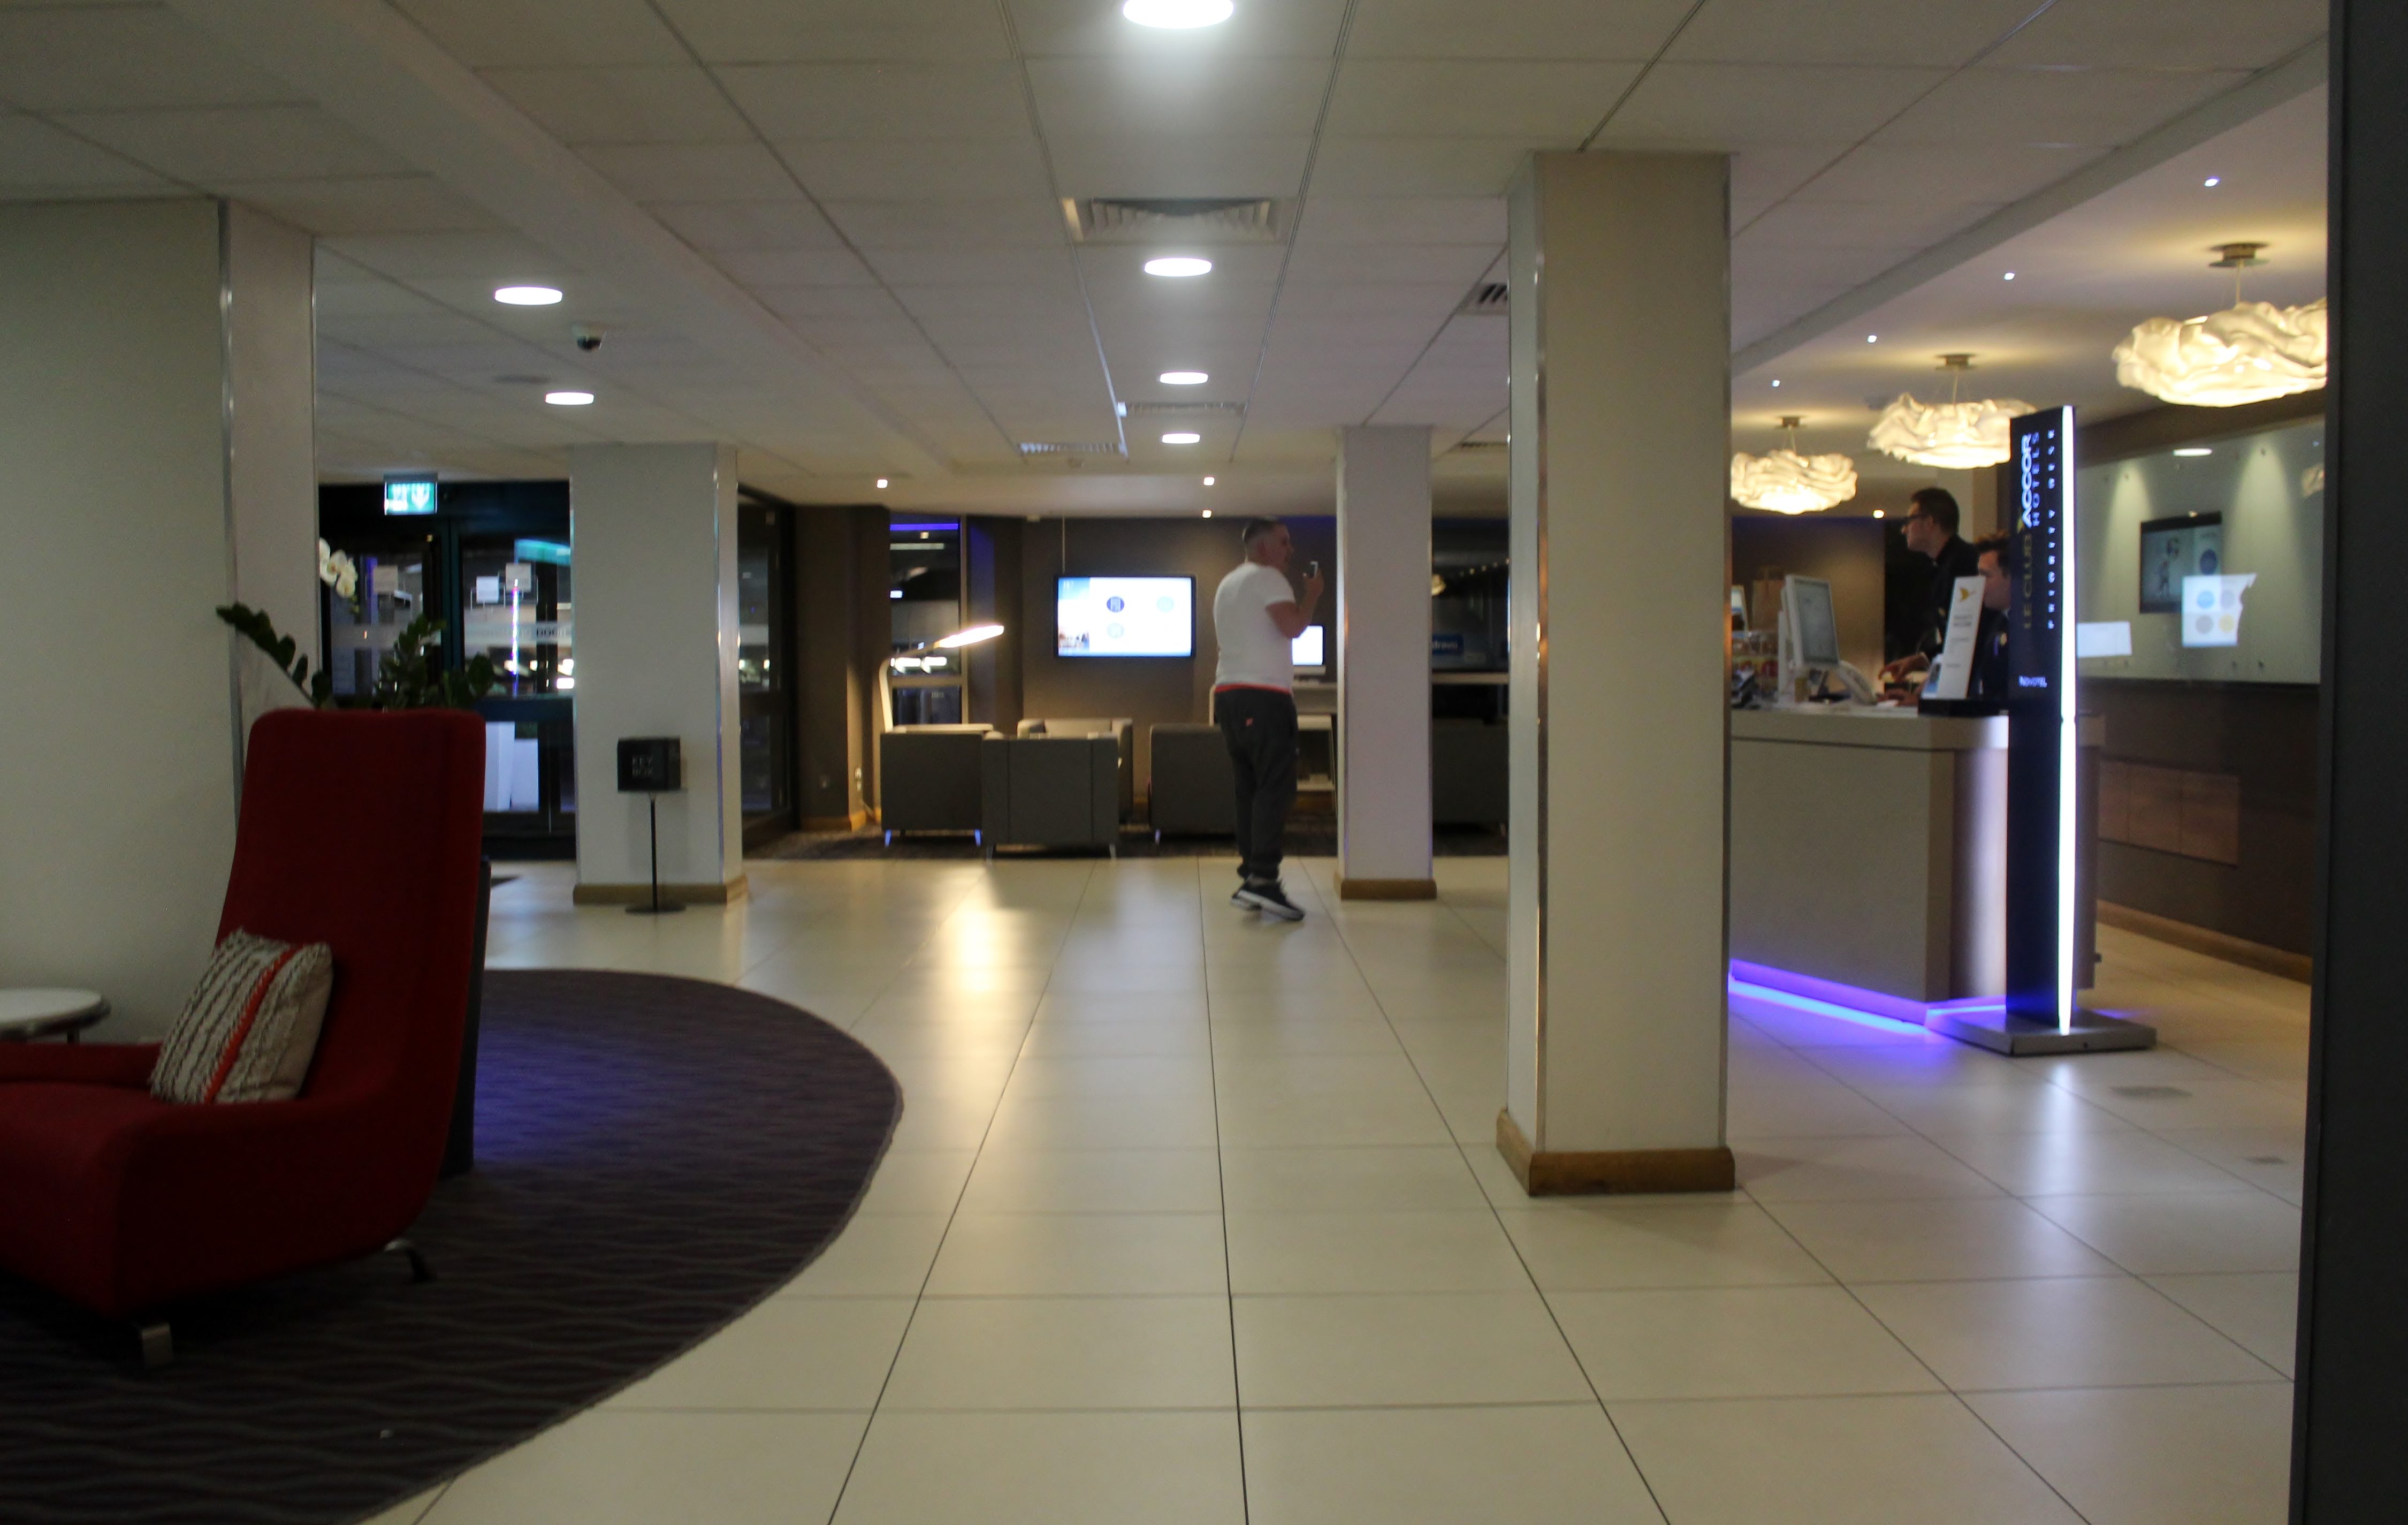 Novotel Hotel Birmingham Airport – Hotel Review - Globalmouse Travels